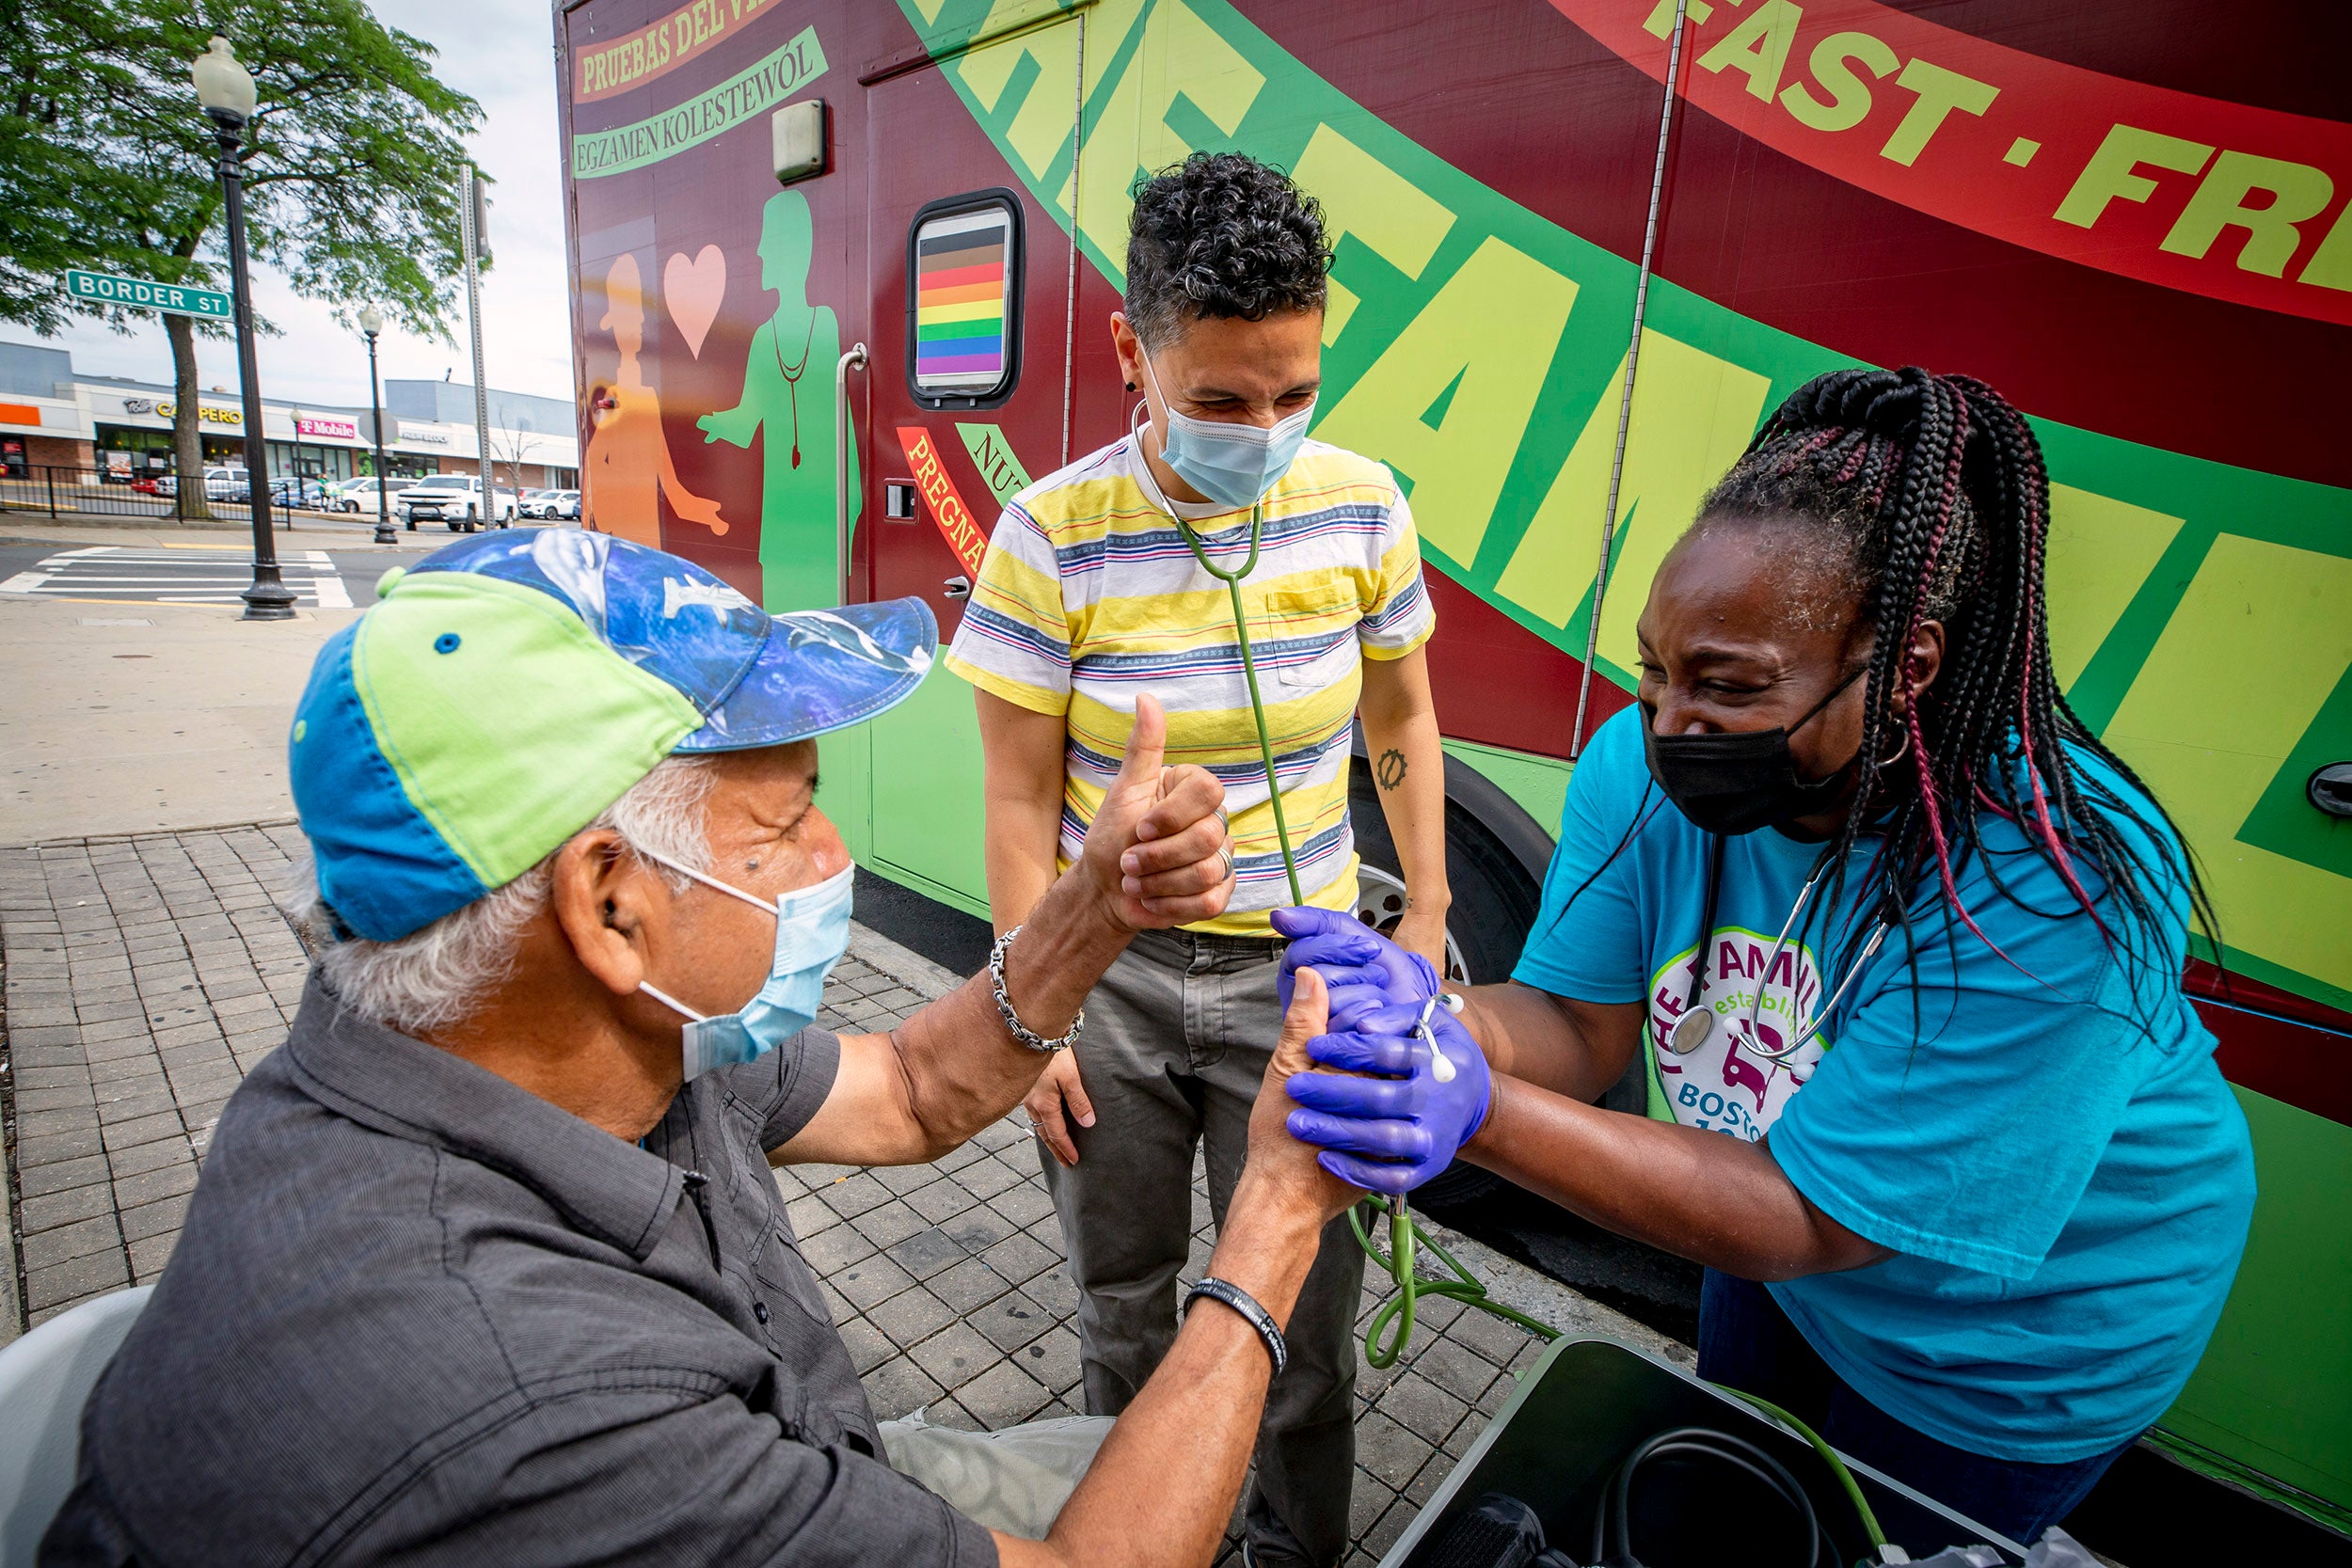 Simone de Oliveira, center and Rainelle Walker White, right, assistant director, work together to administer a blood pressure test to Wilson Viana Silva of E. Boston at Harvard University's Family Van.